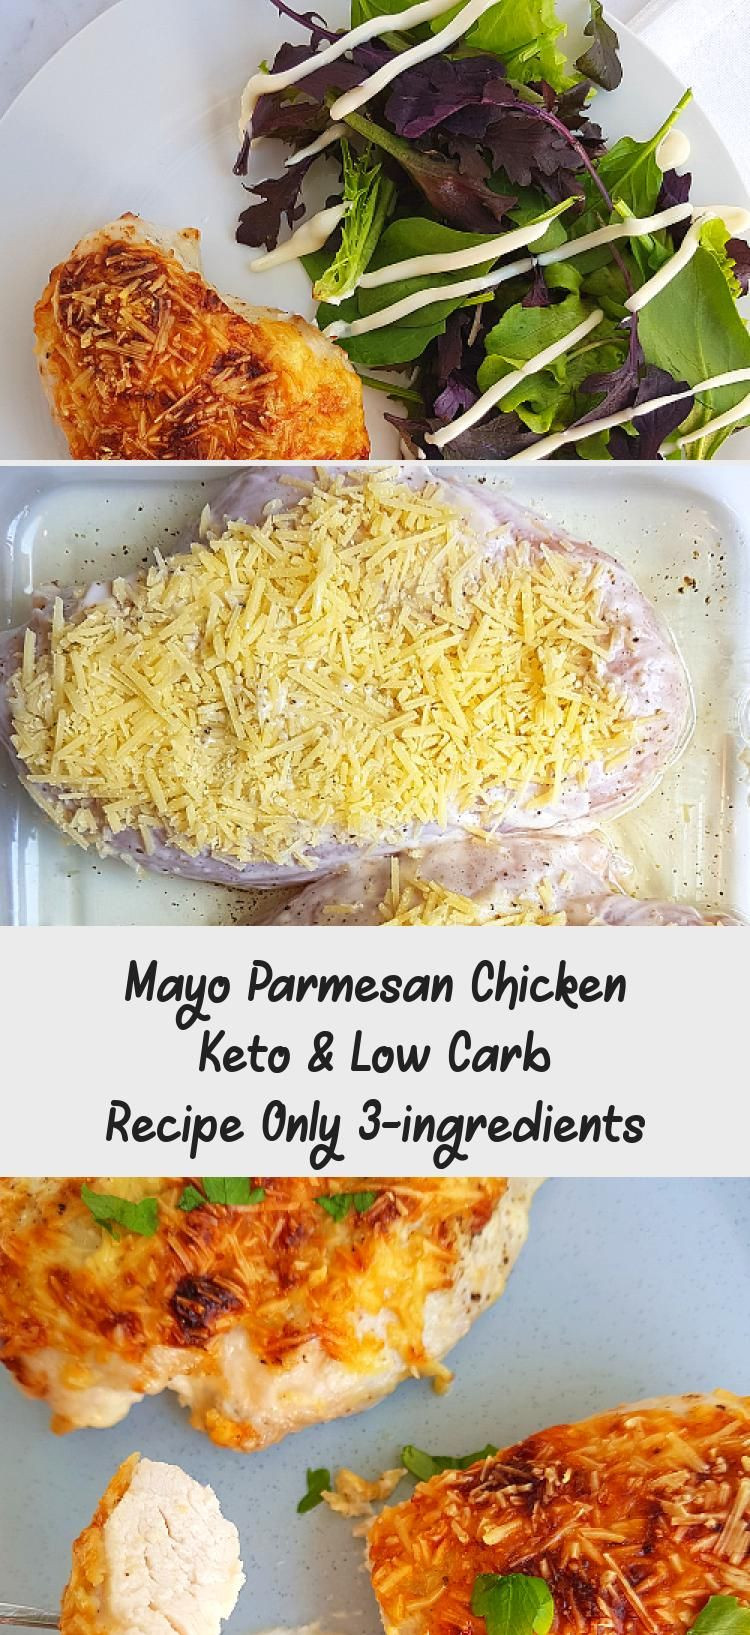 Mayo Parmesan Chicken Keto
 Best ever keto mayo chicken parmesan thighs that will